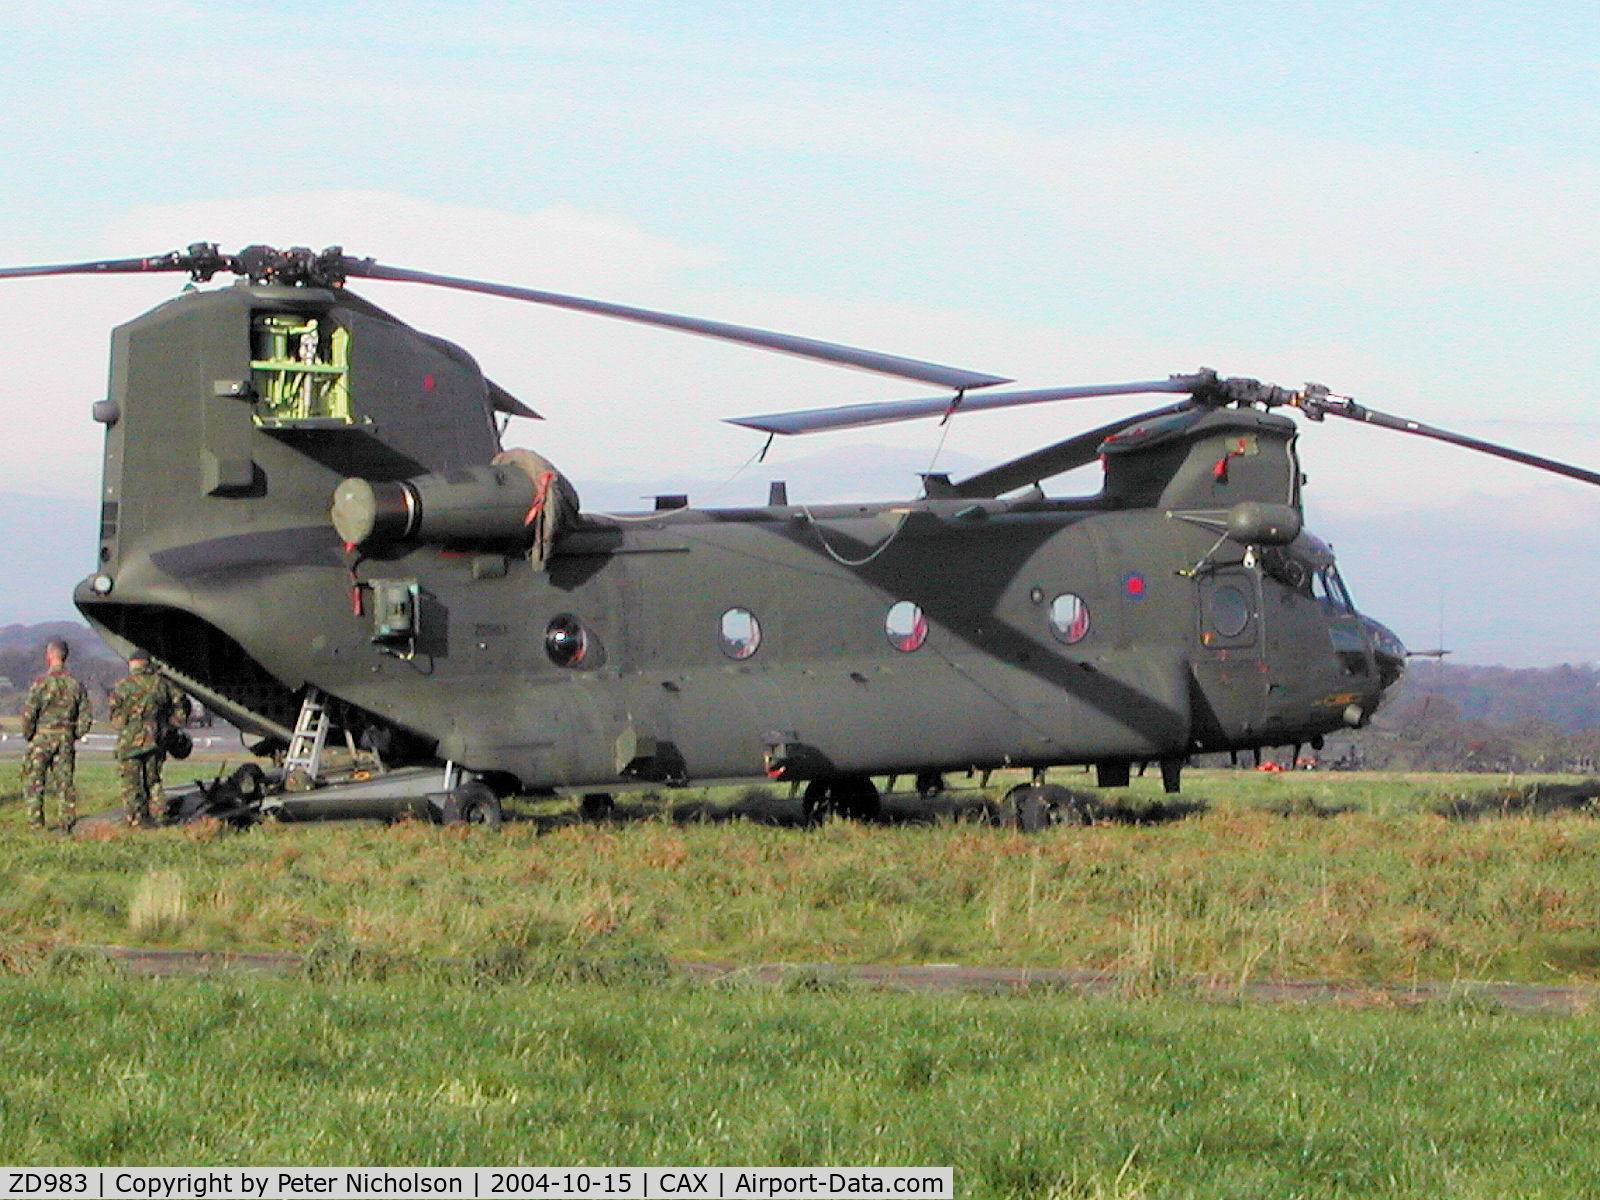 ZD983, Boeing Vertol Chinook HC.2 C/N M/A040/B-875/M7022, Chinook HC.2, callsign Wagtail 73, of 18 Squadron as seen at Carlisle in October 2004.